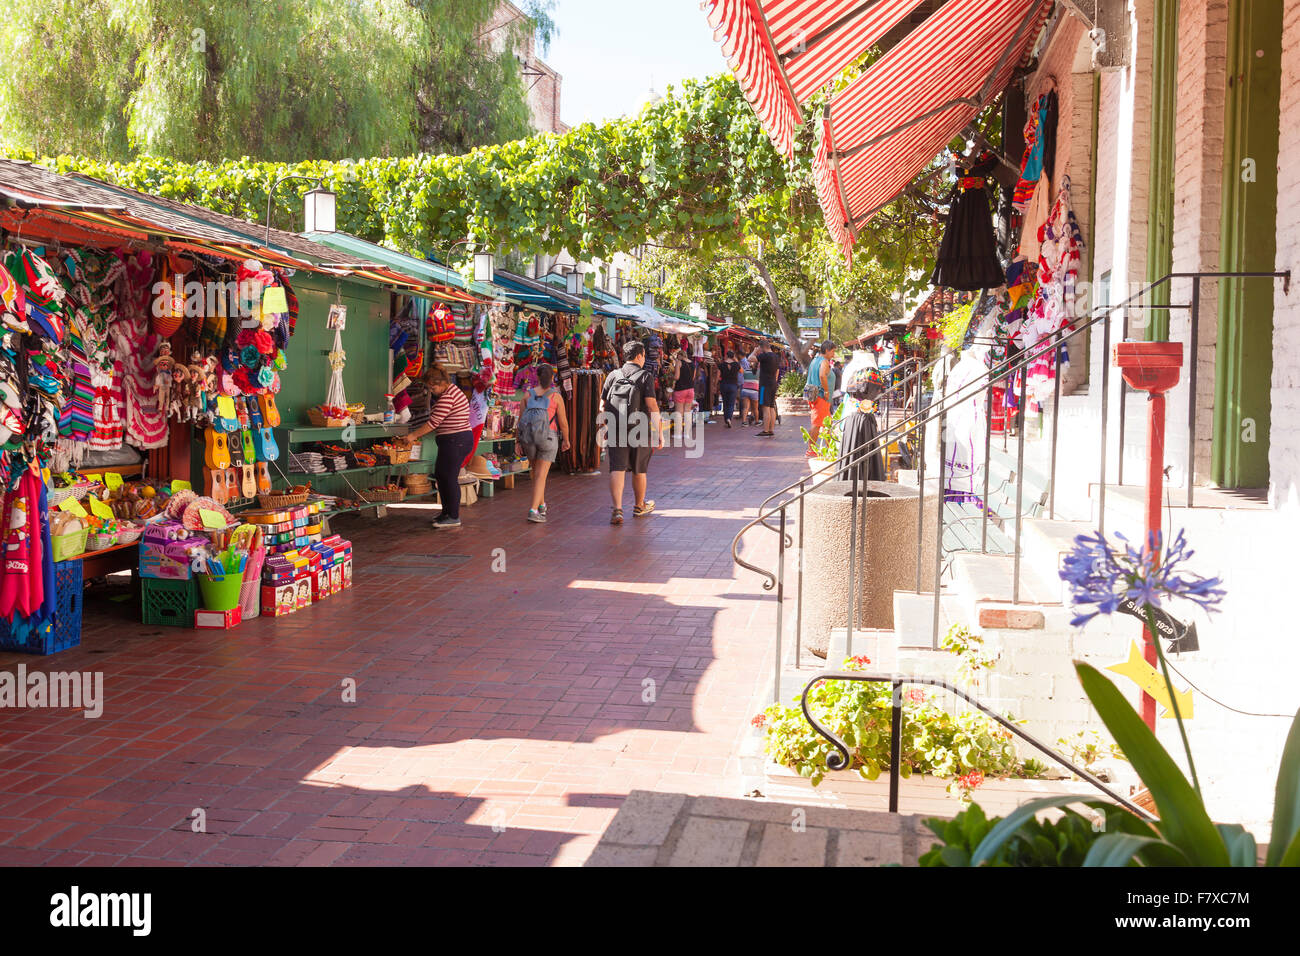 Street Market in Los Angeles market booths on Olvera Street in Los Angeles Plaza Historic District, Los Angeles, California, USA Stock Photo